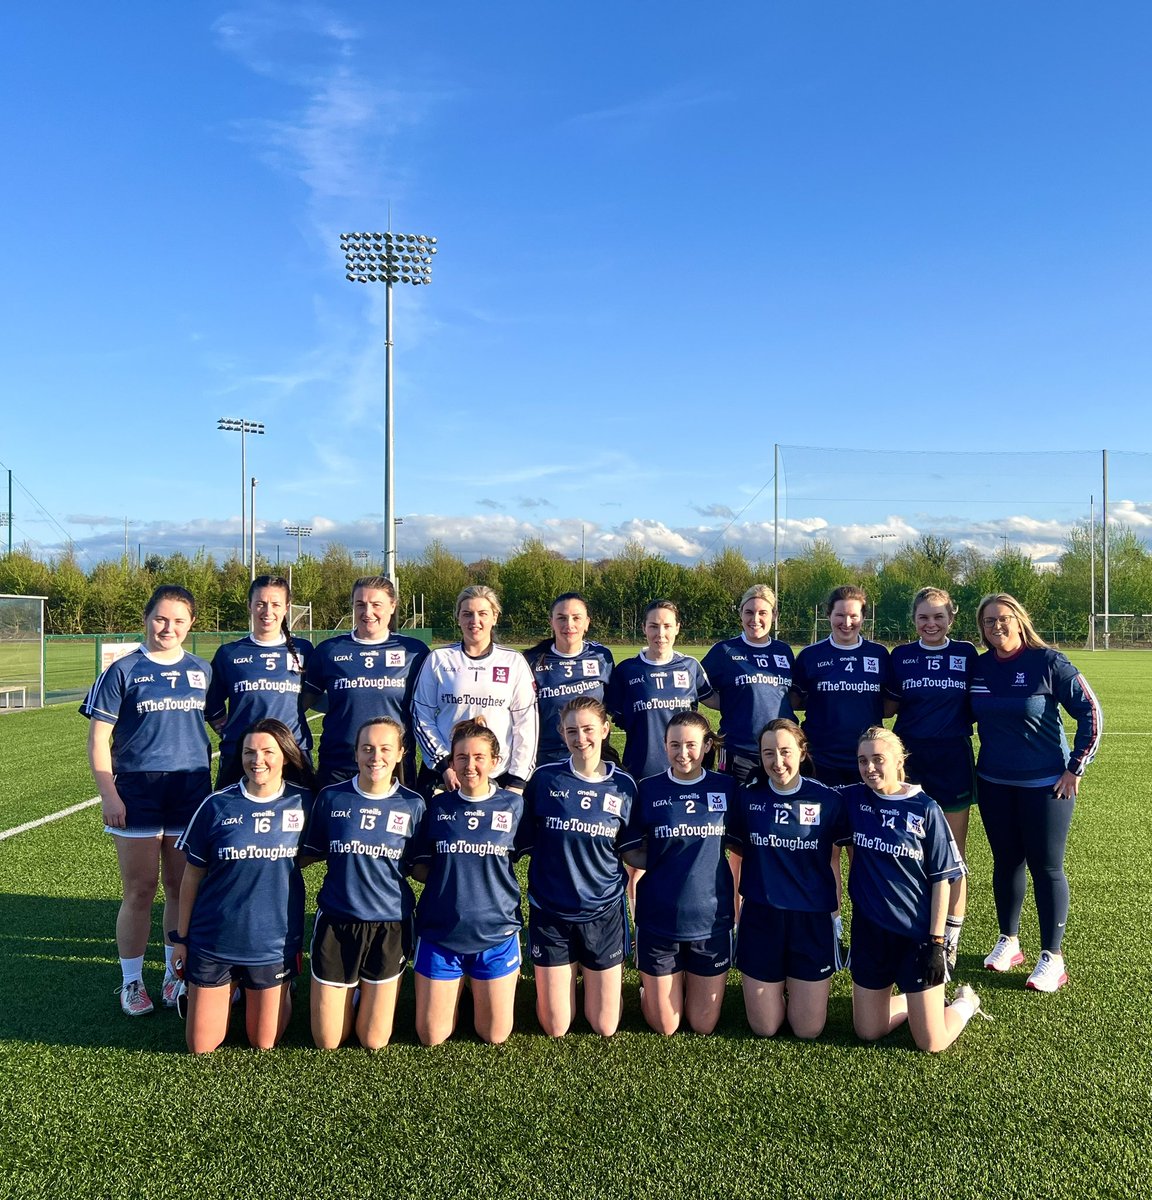 First fixture of the year for the @AIB_GAA ladies last night at the GAA centre in Abbotstown vs very tough opposition Dee Rangers from Meath #TheToughest